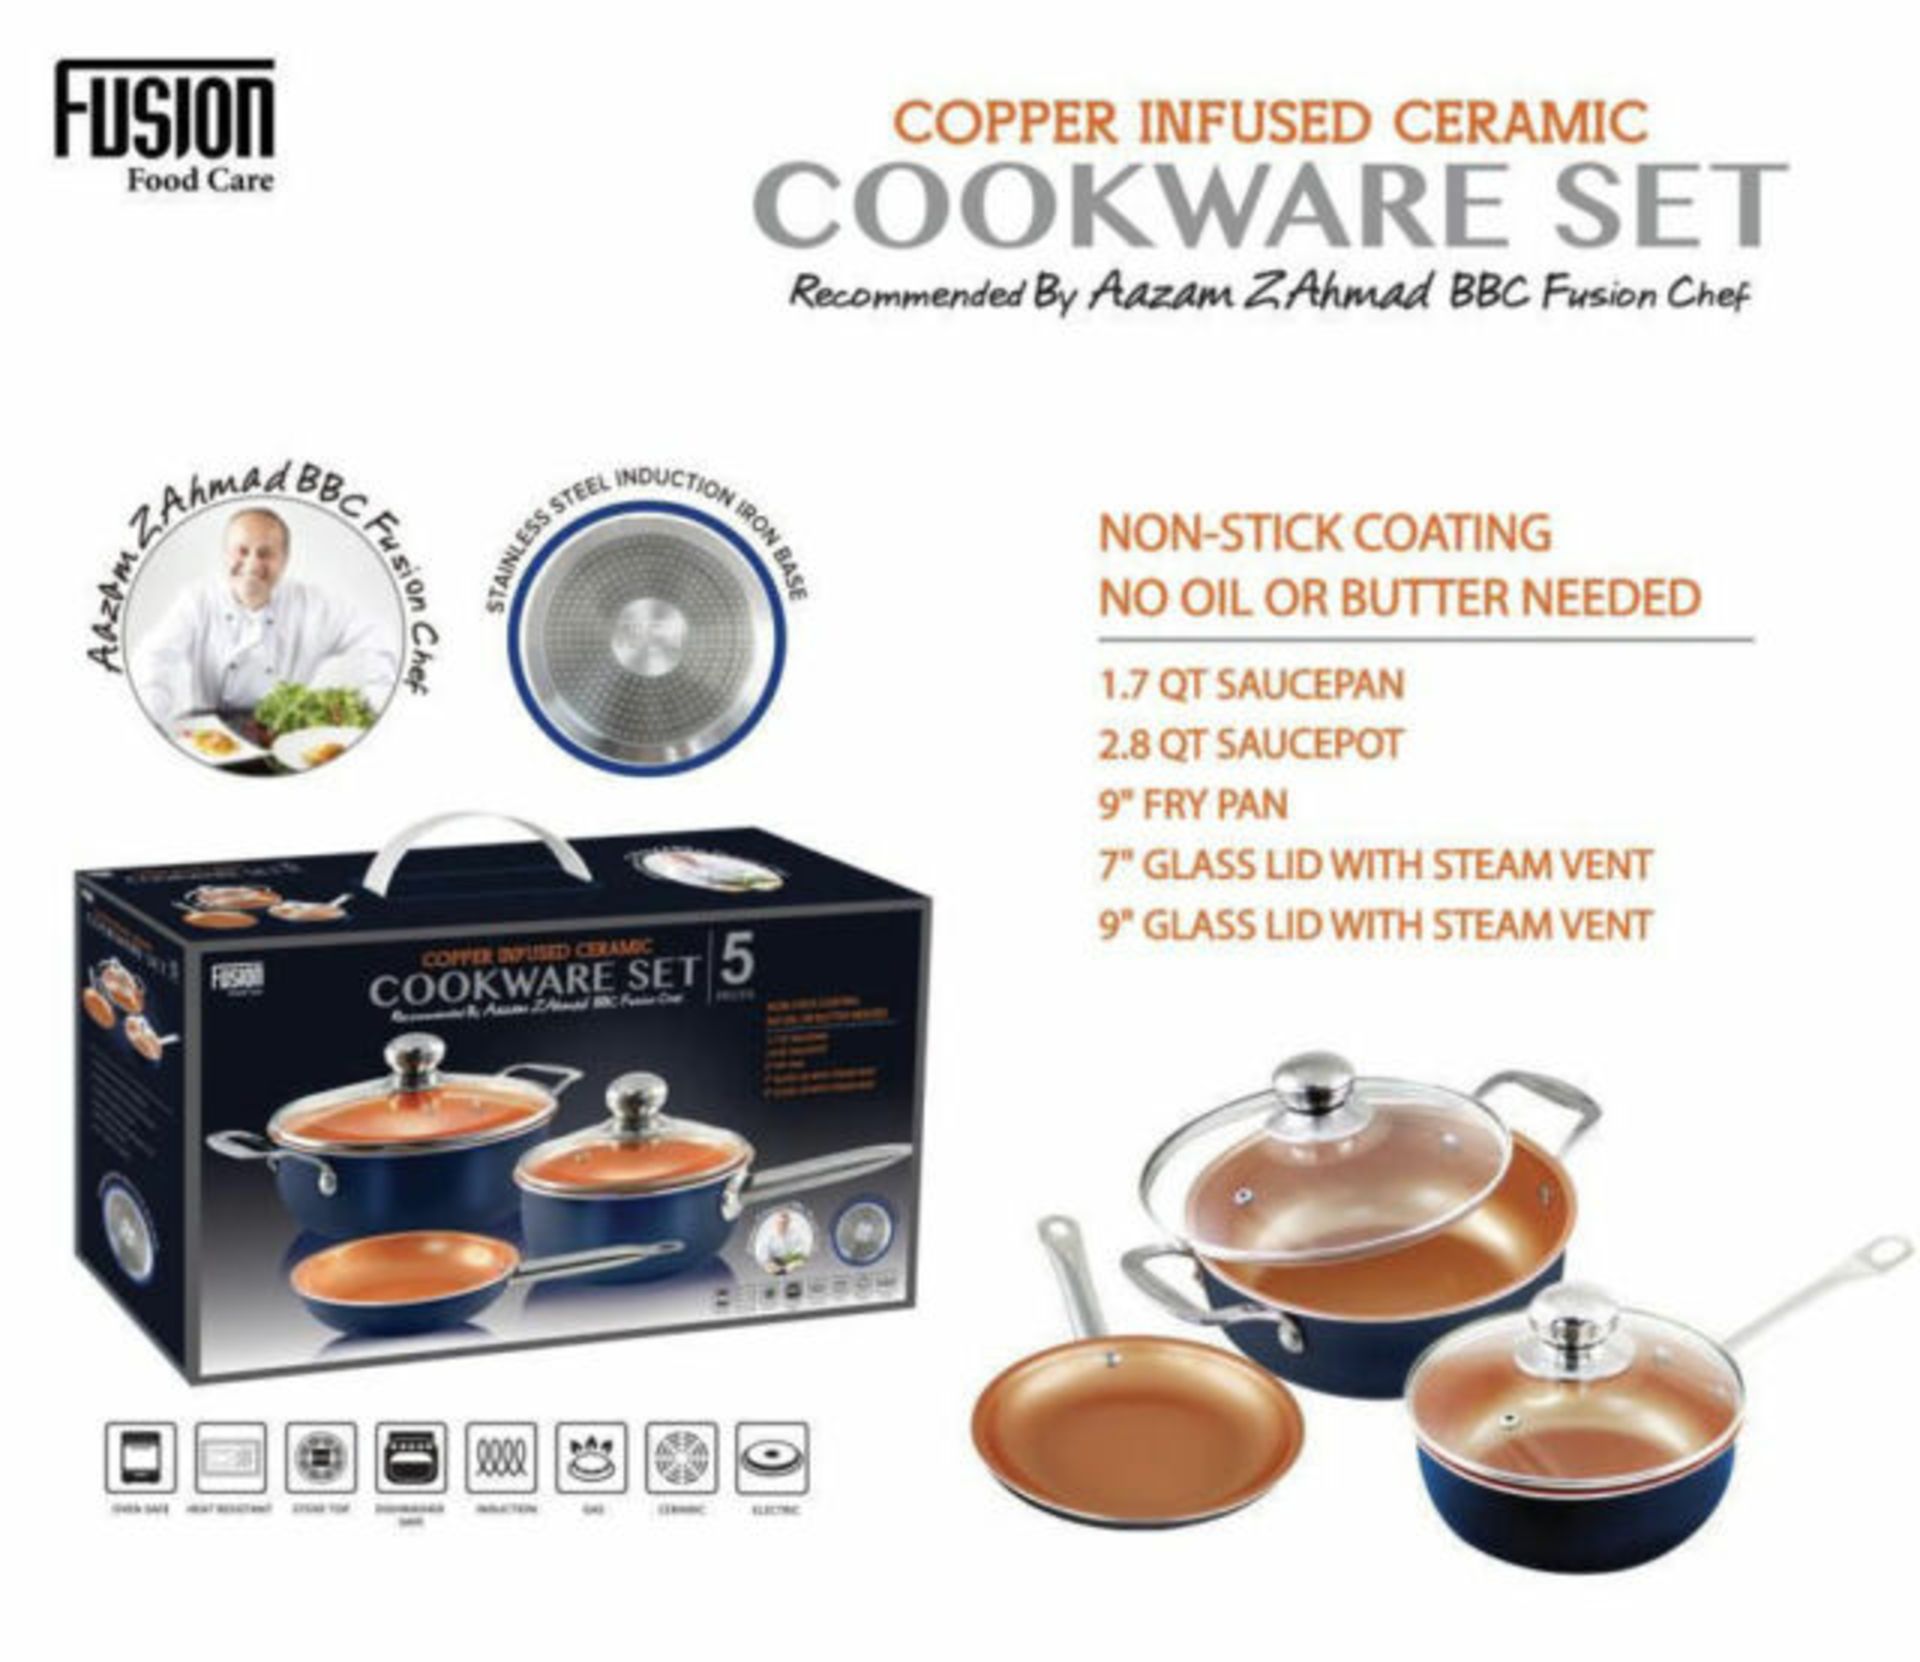 V Brand New Five Piece Copper Infused Ceramic Cookware Set - Non Stick Coating (Also Suitable For